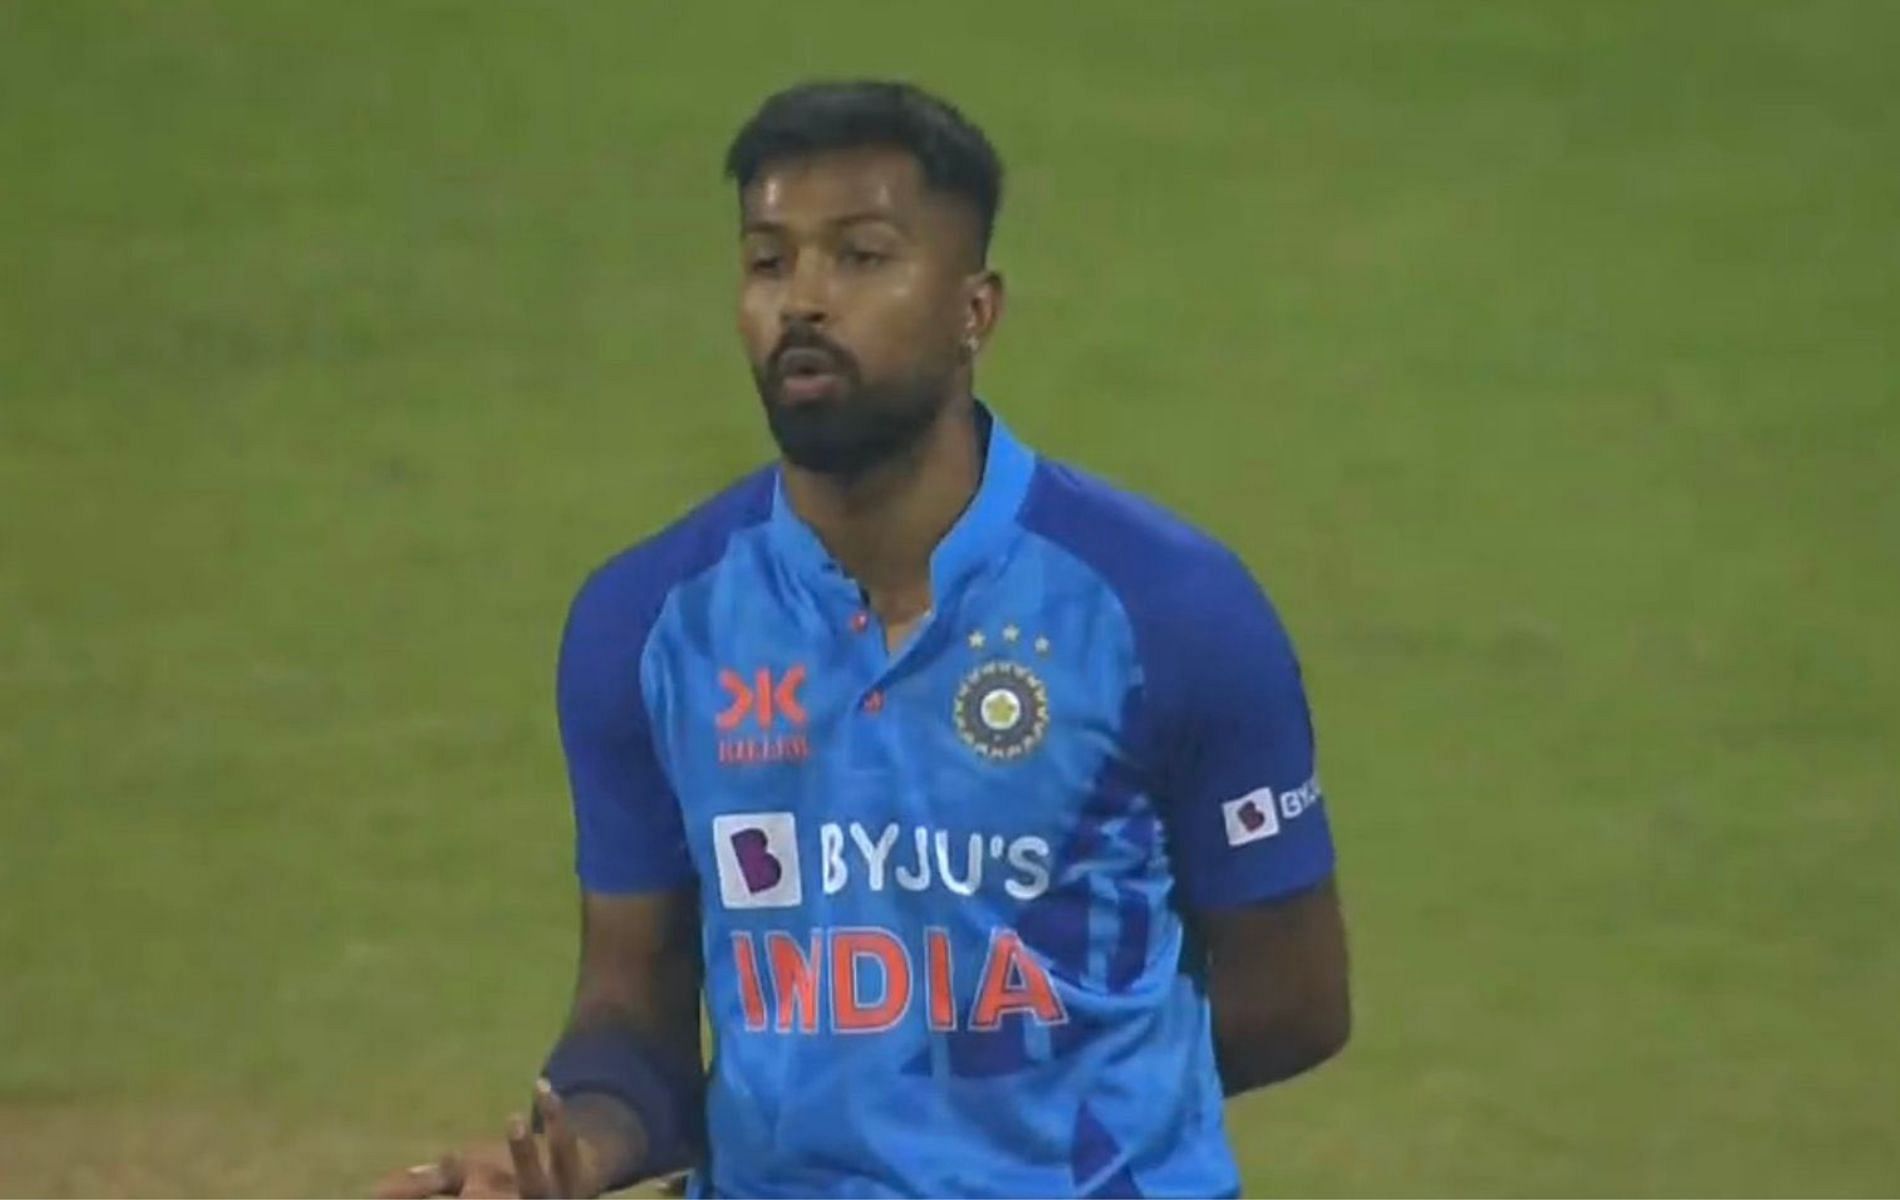 Hardik Pandya finished with figures of 0/26 in five overs. (Pic: Disney+Hotstar)